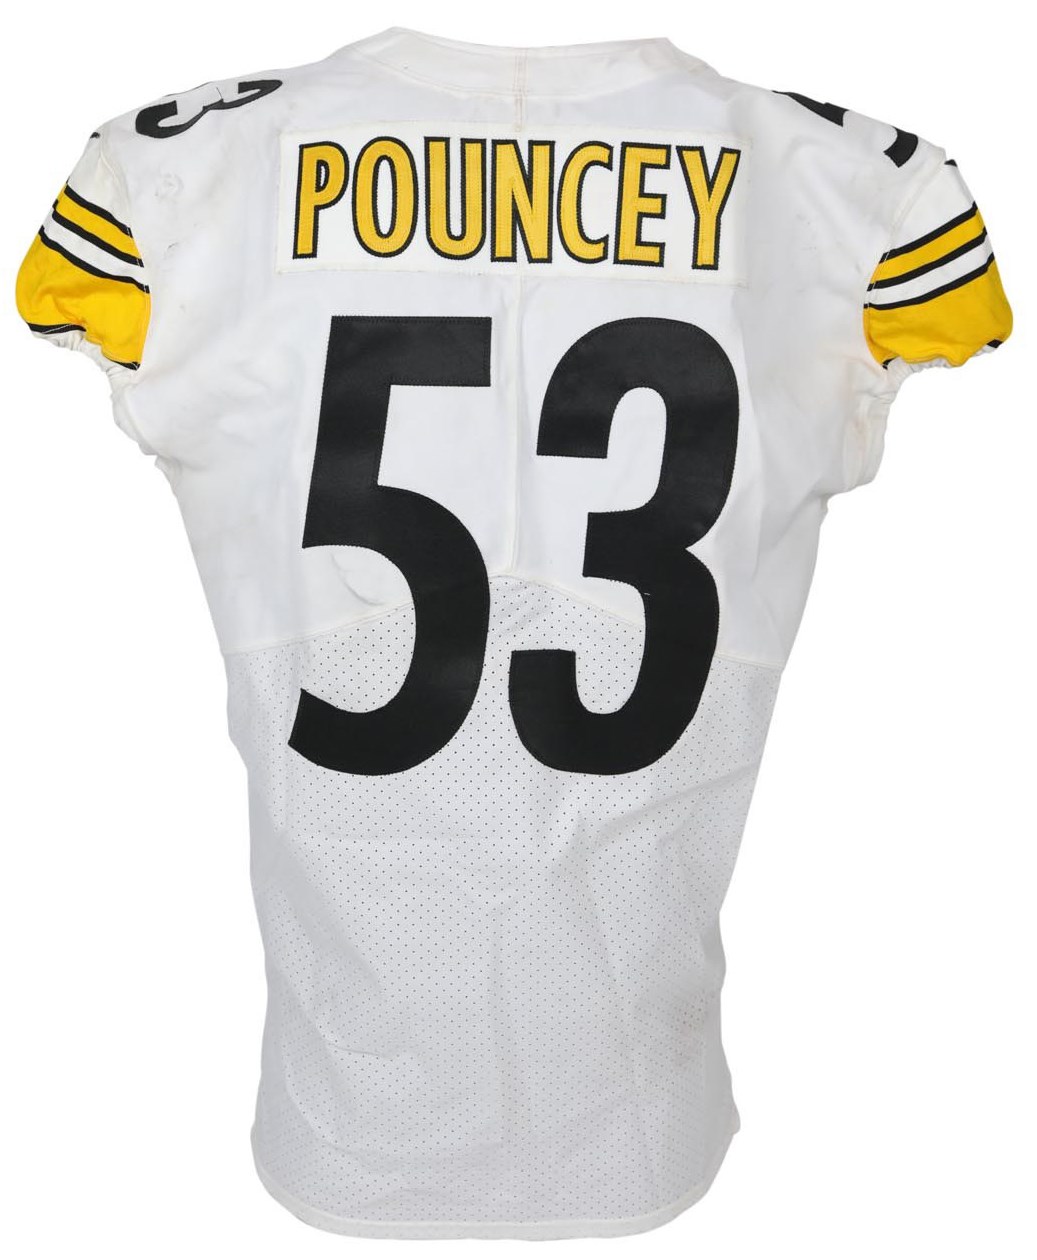 - 2017 Maurkice Pouncey Game Worn Pittsburgh Steelers Jersey (Photo-Matched)